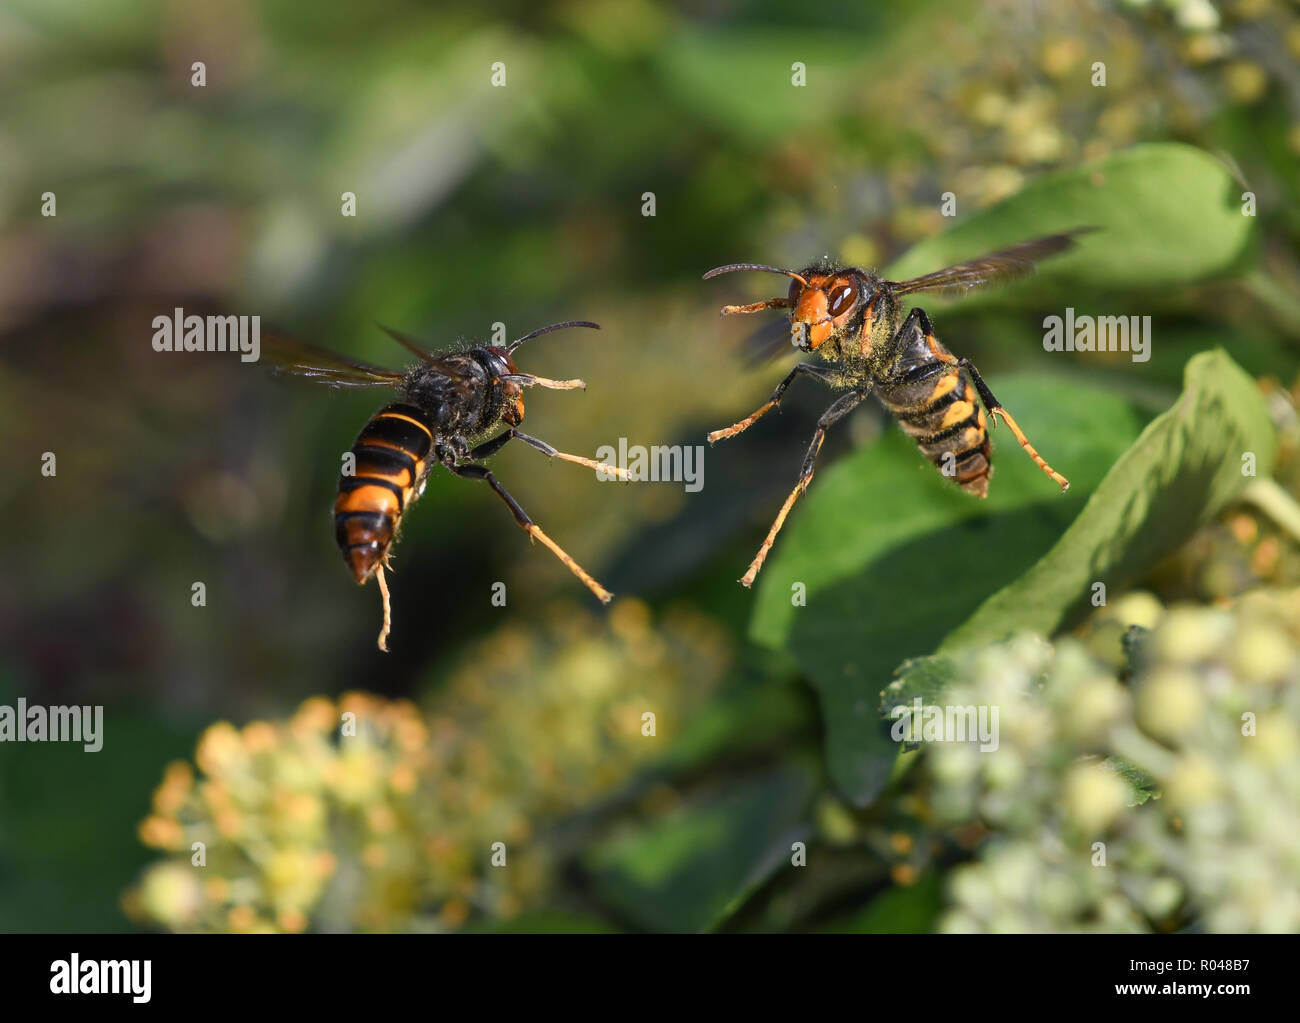 Close-up of two Asian wasps fighting in flight Stock Photo